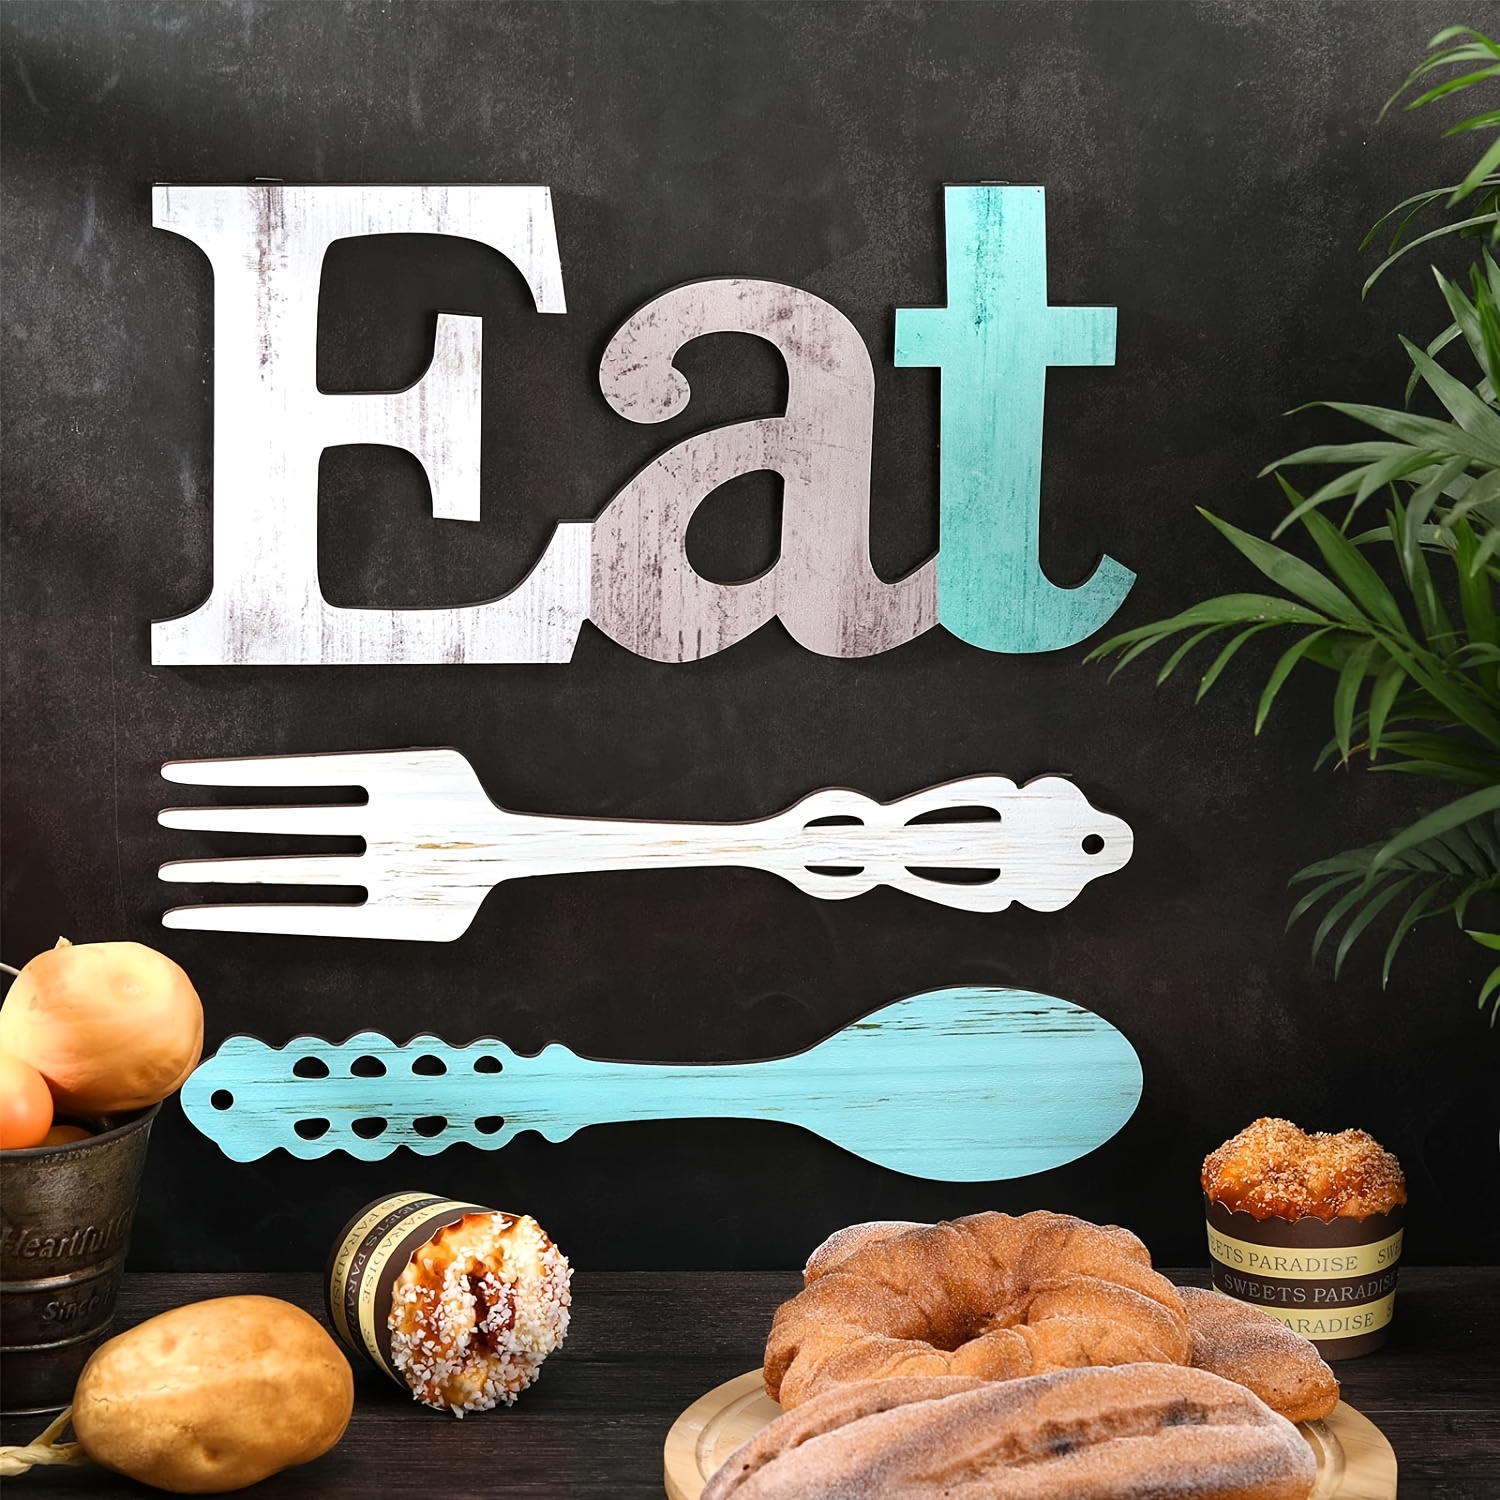 

3-piece Rustic Wooden 'eat' Sign Set - Fork & Spoon Wall Decor For Kitchen And Home, Charming Country Dining Room Art